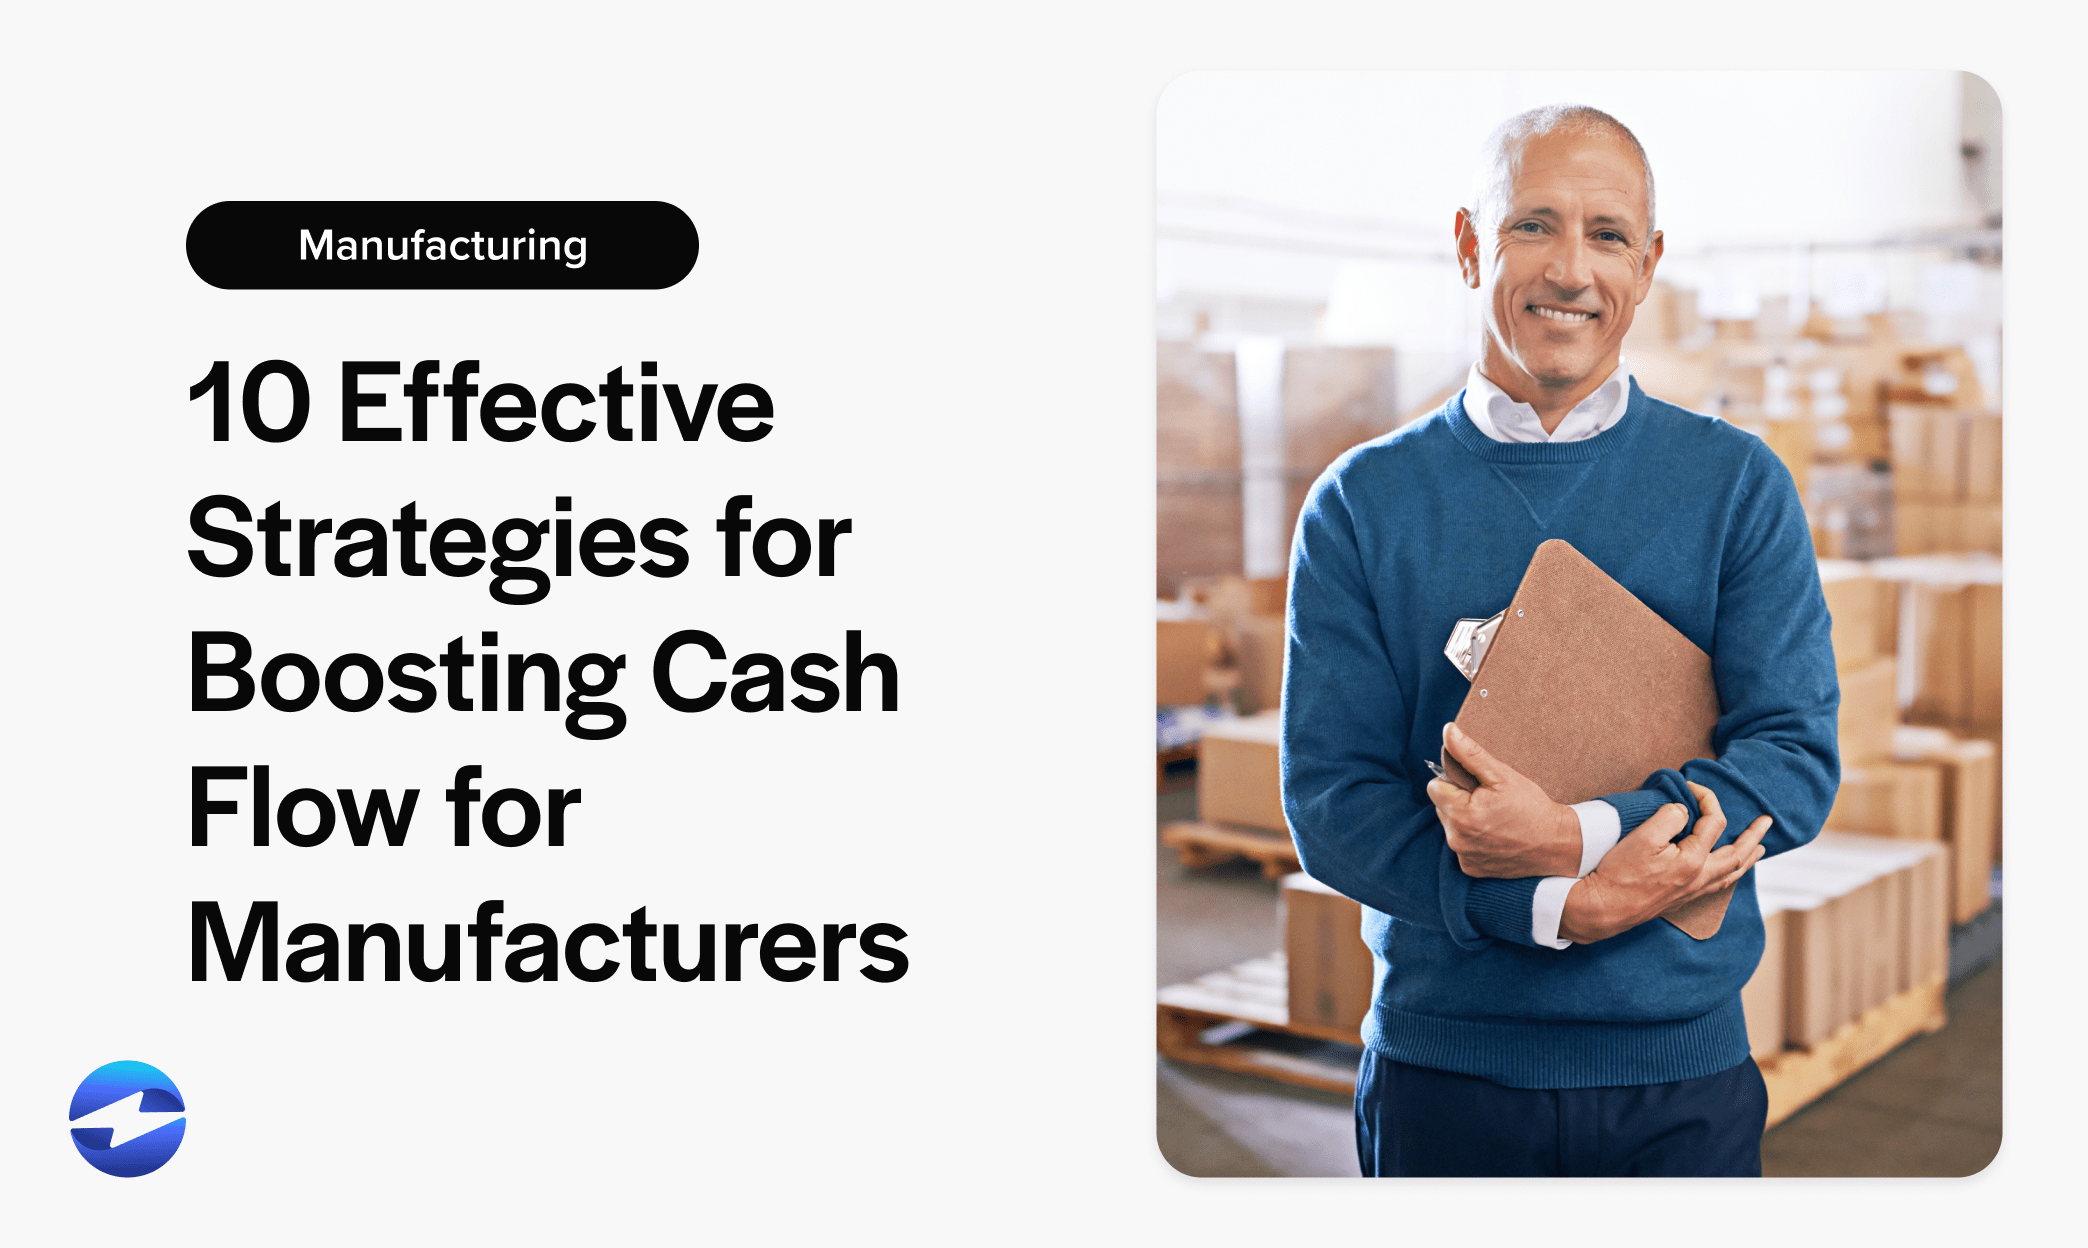 10 Effective Strategies for Boosting Cash Flow for Manufacturers